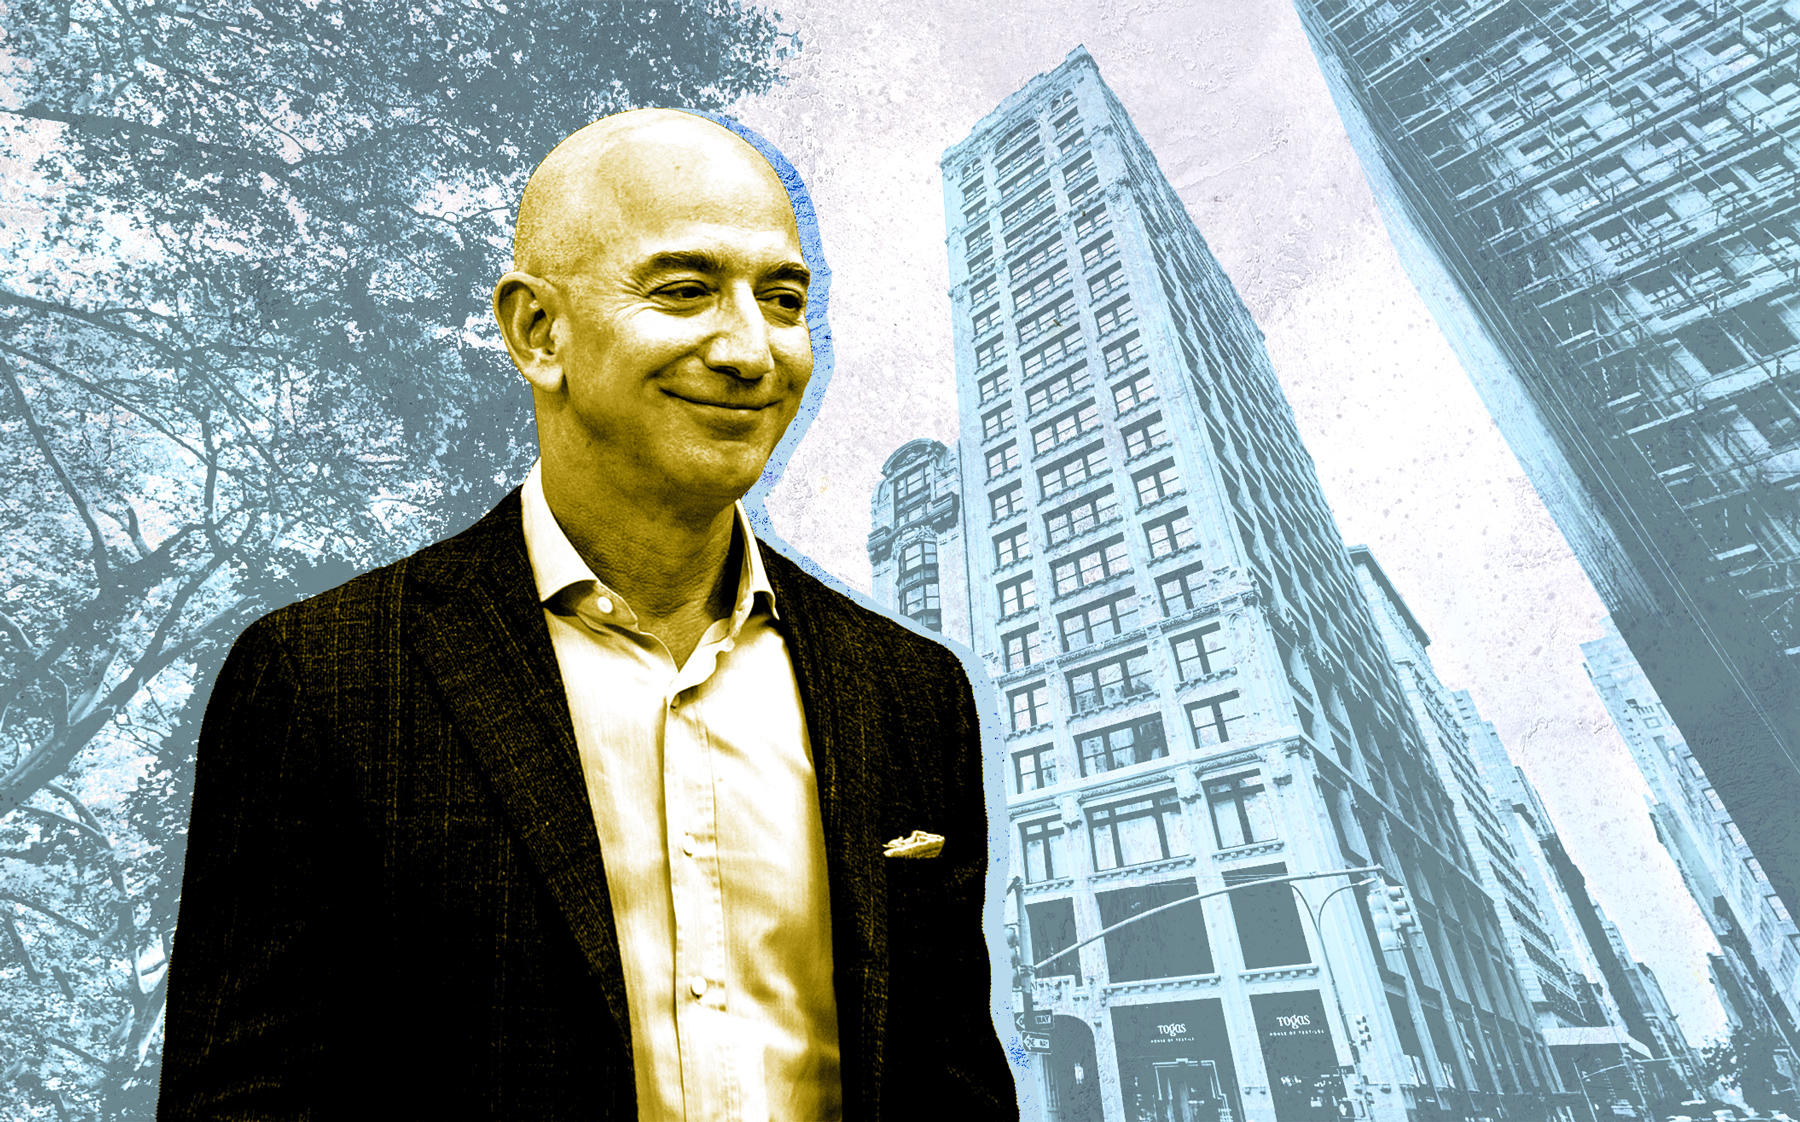 Amazon CEO Jeff Bezos and 212 Fifth Avenue (Credit: Bezos by Andrej Sokolow/picture alliance via Getty Images; Google Maps)